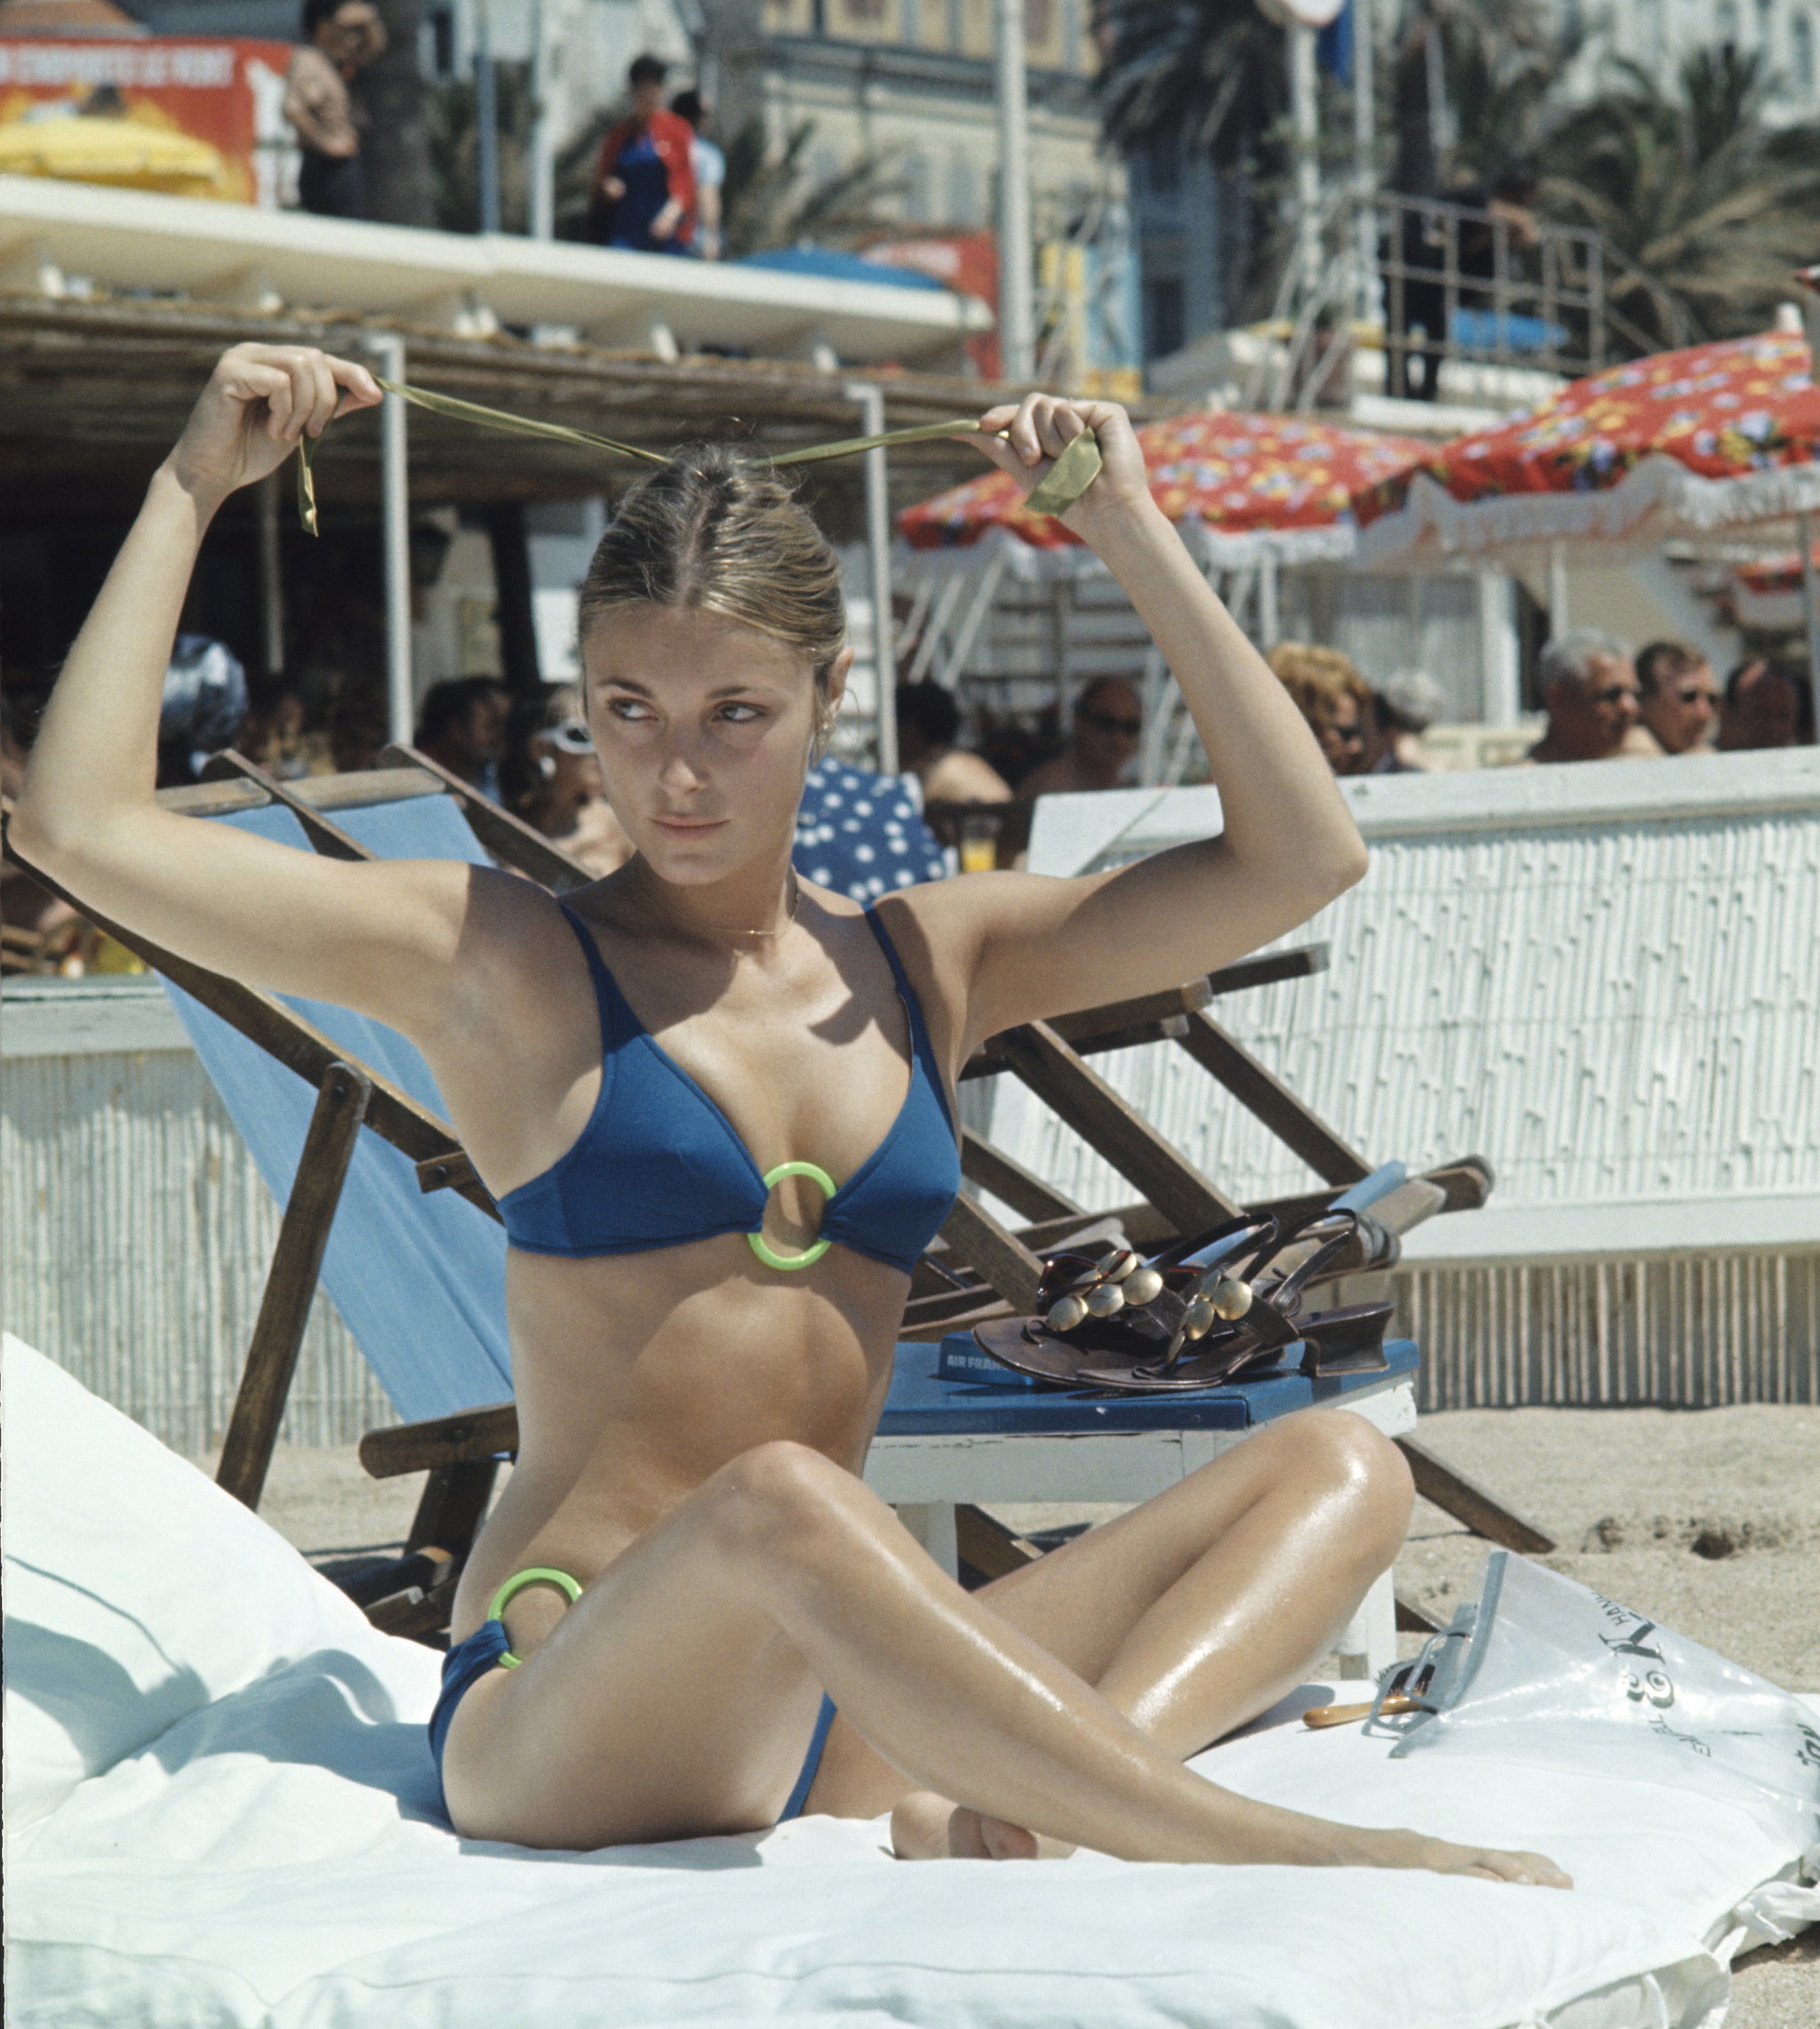 Sharon Tate on the beach at the Cannes Film Festival in 1968.